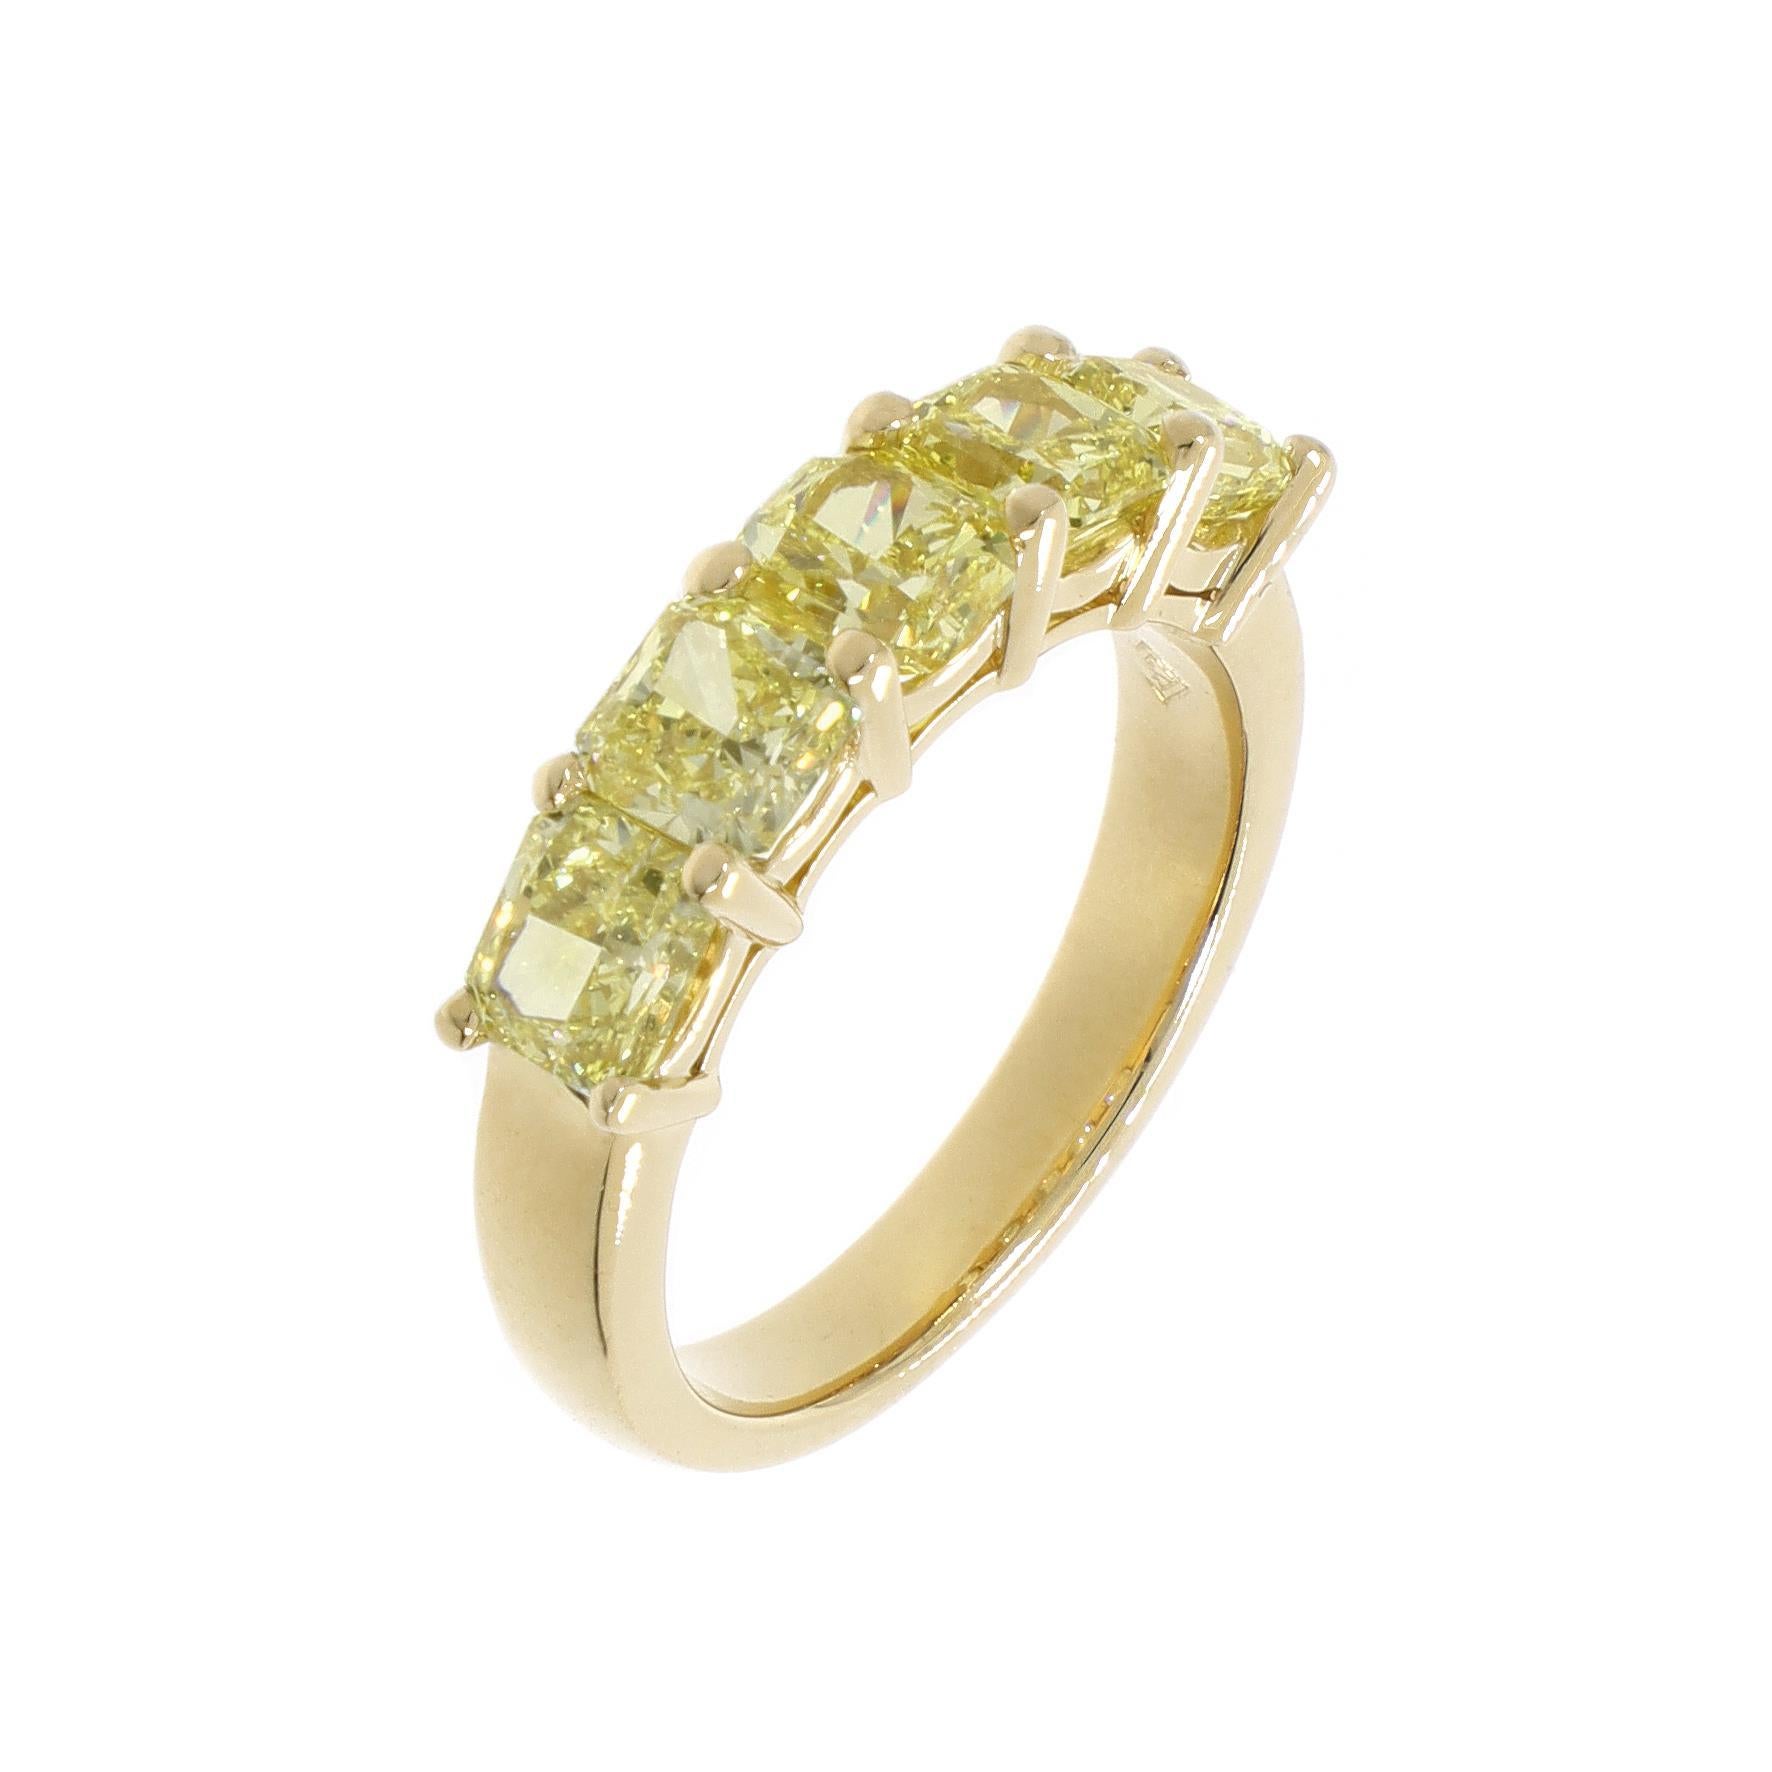 Set with 5 radiant-cut natural fancy yellow diamonds weighing a total of 3.14cts. Mounted in 18k yellow gold. Made in Switzerland.